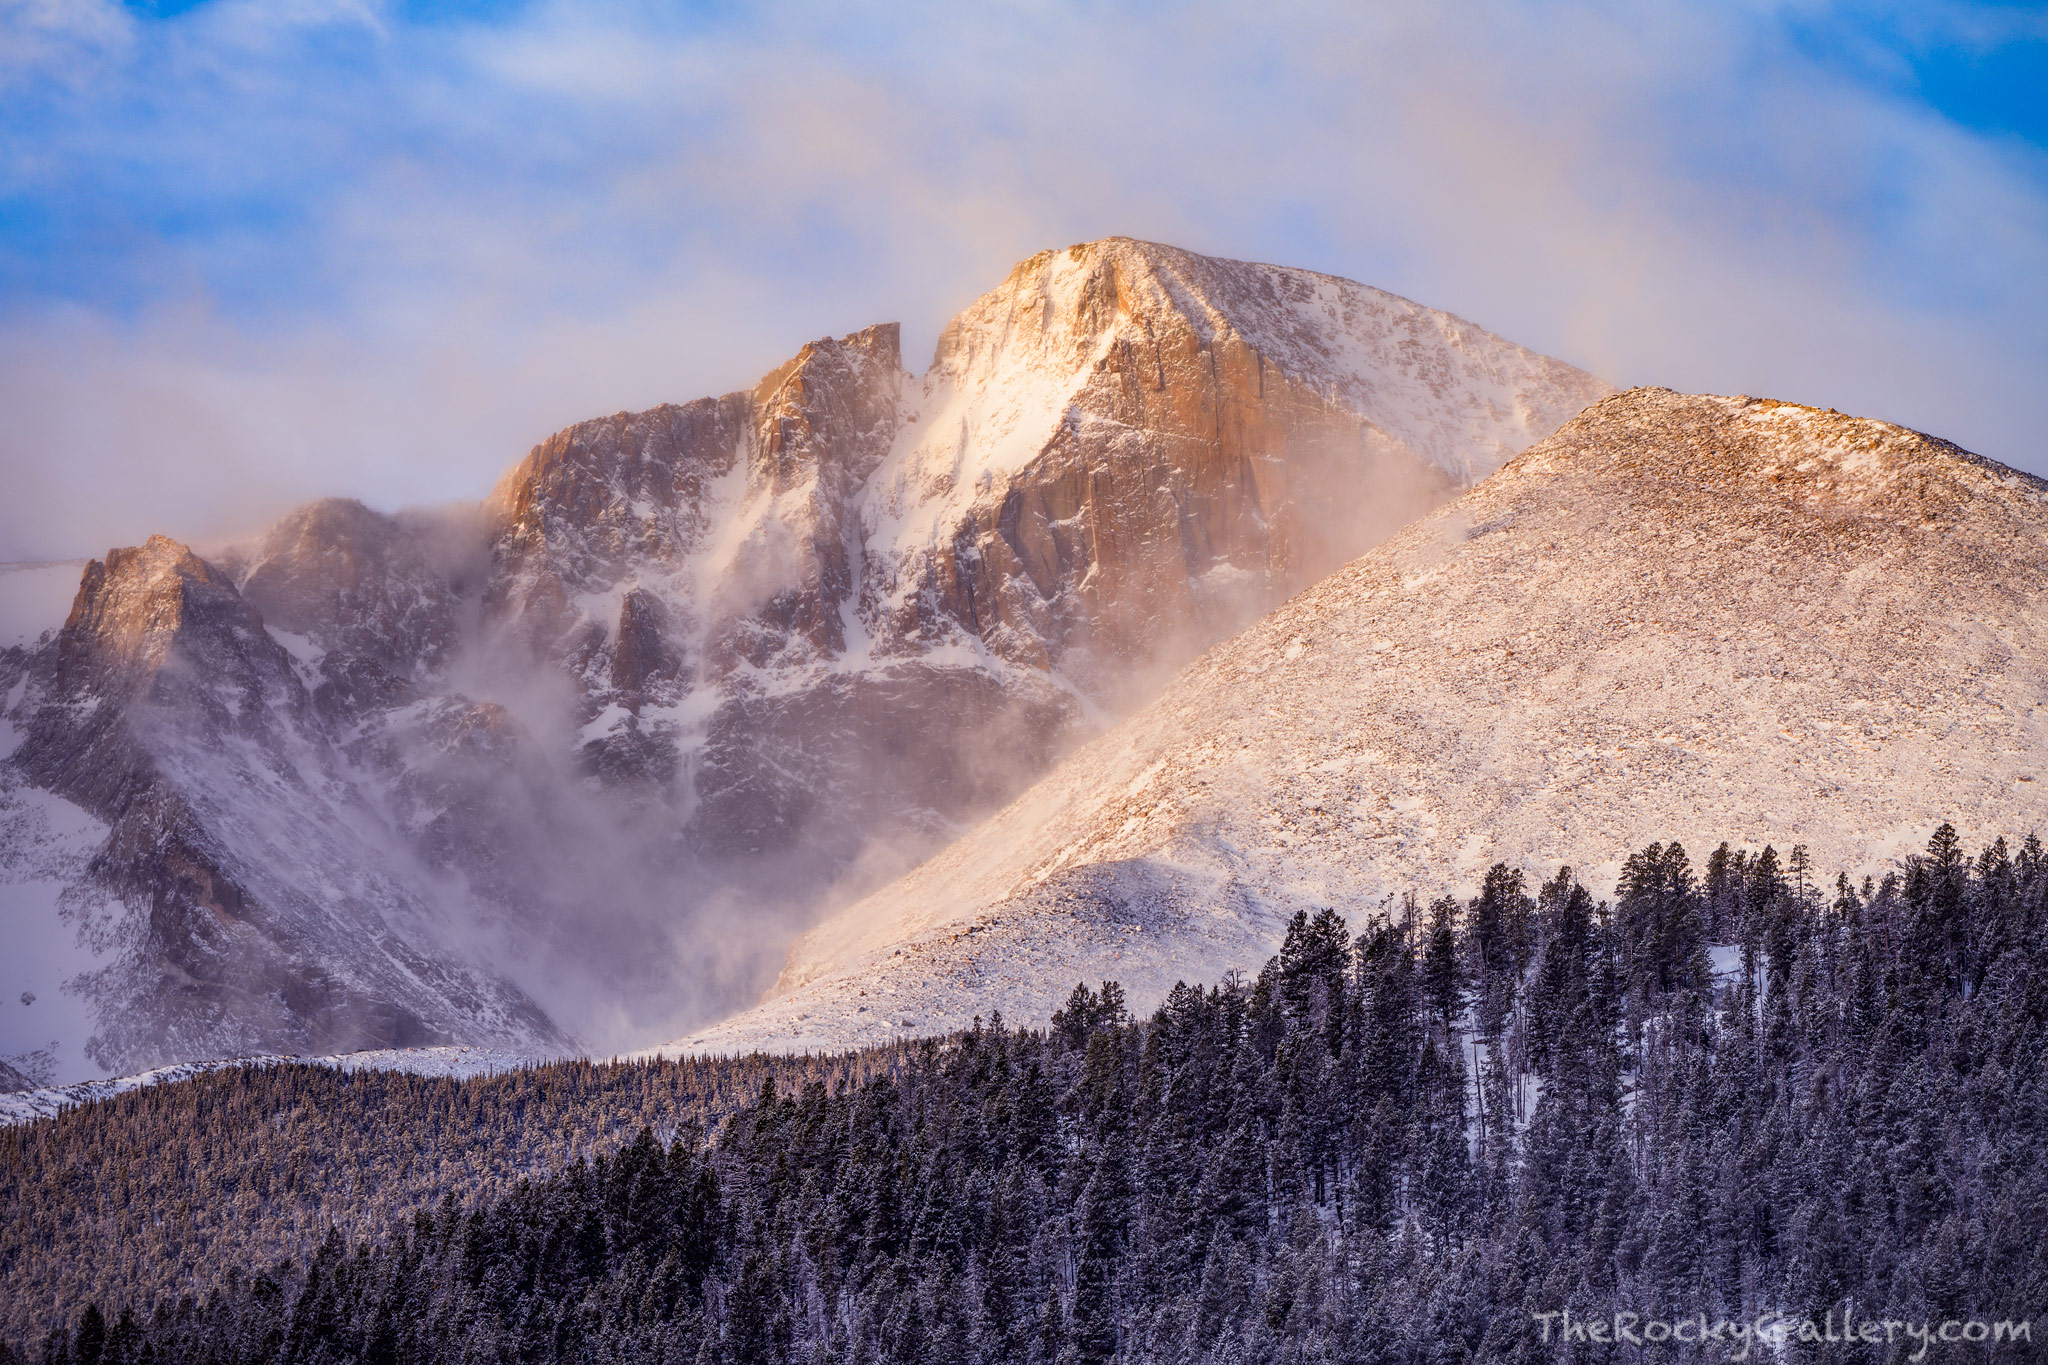 It snowed on Longs Peak the previous night. As is often the case in Rocky Mountain National Park, snows are followed by heavy...